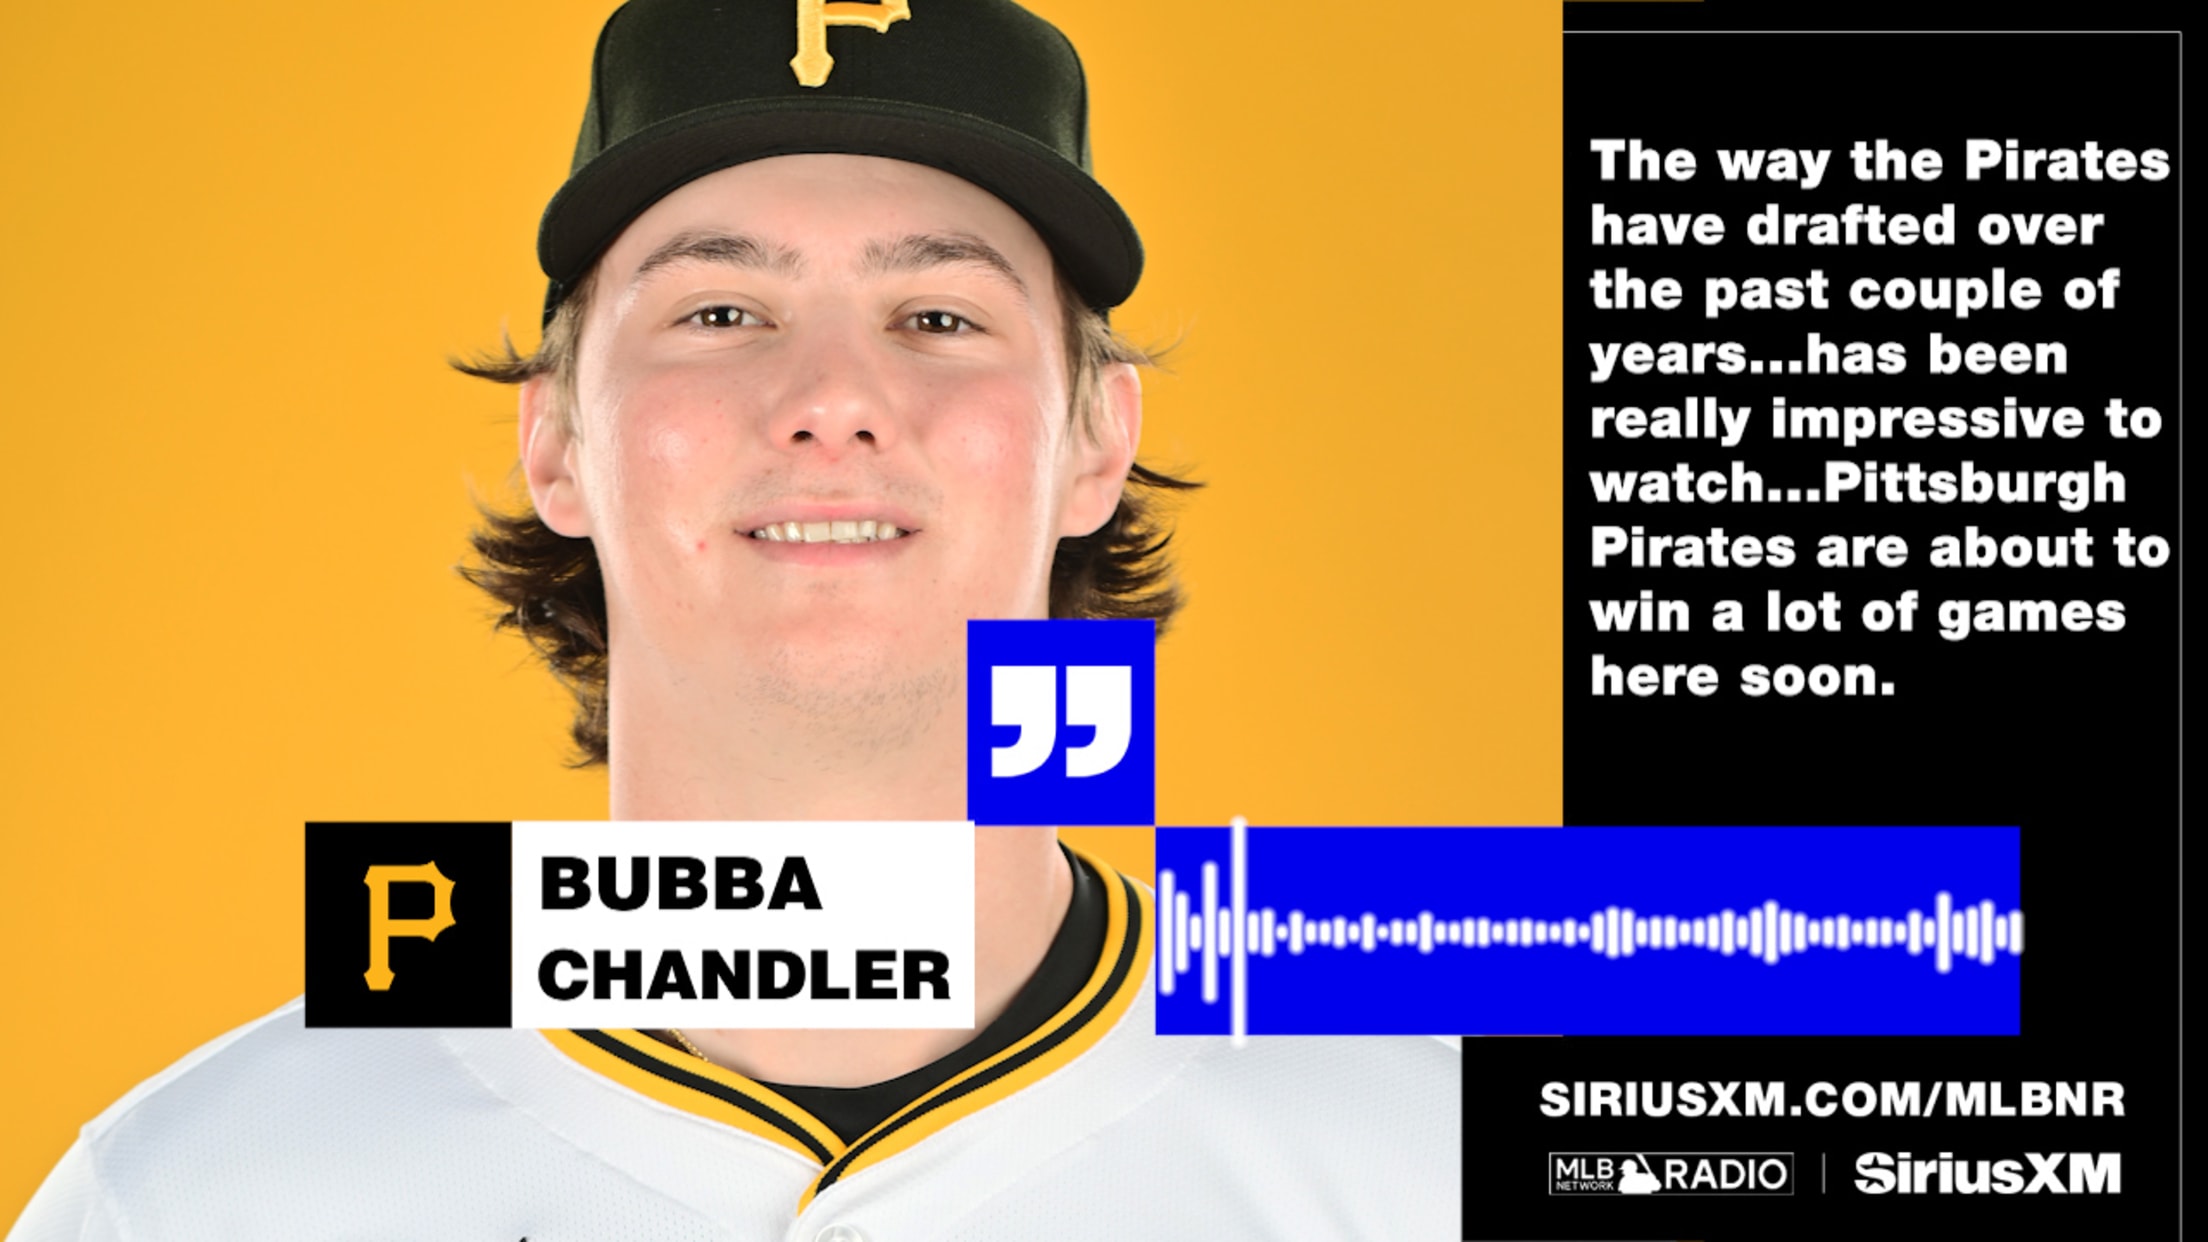 Bubba Chandler talks about the future of the Pirates